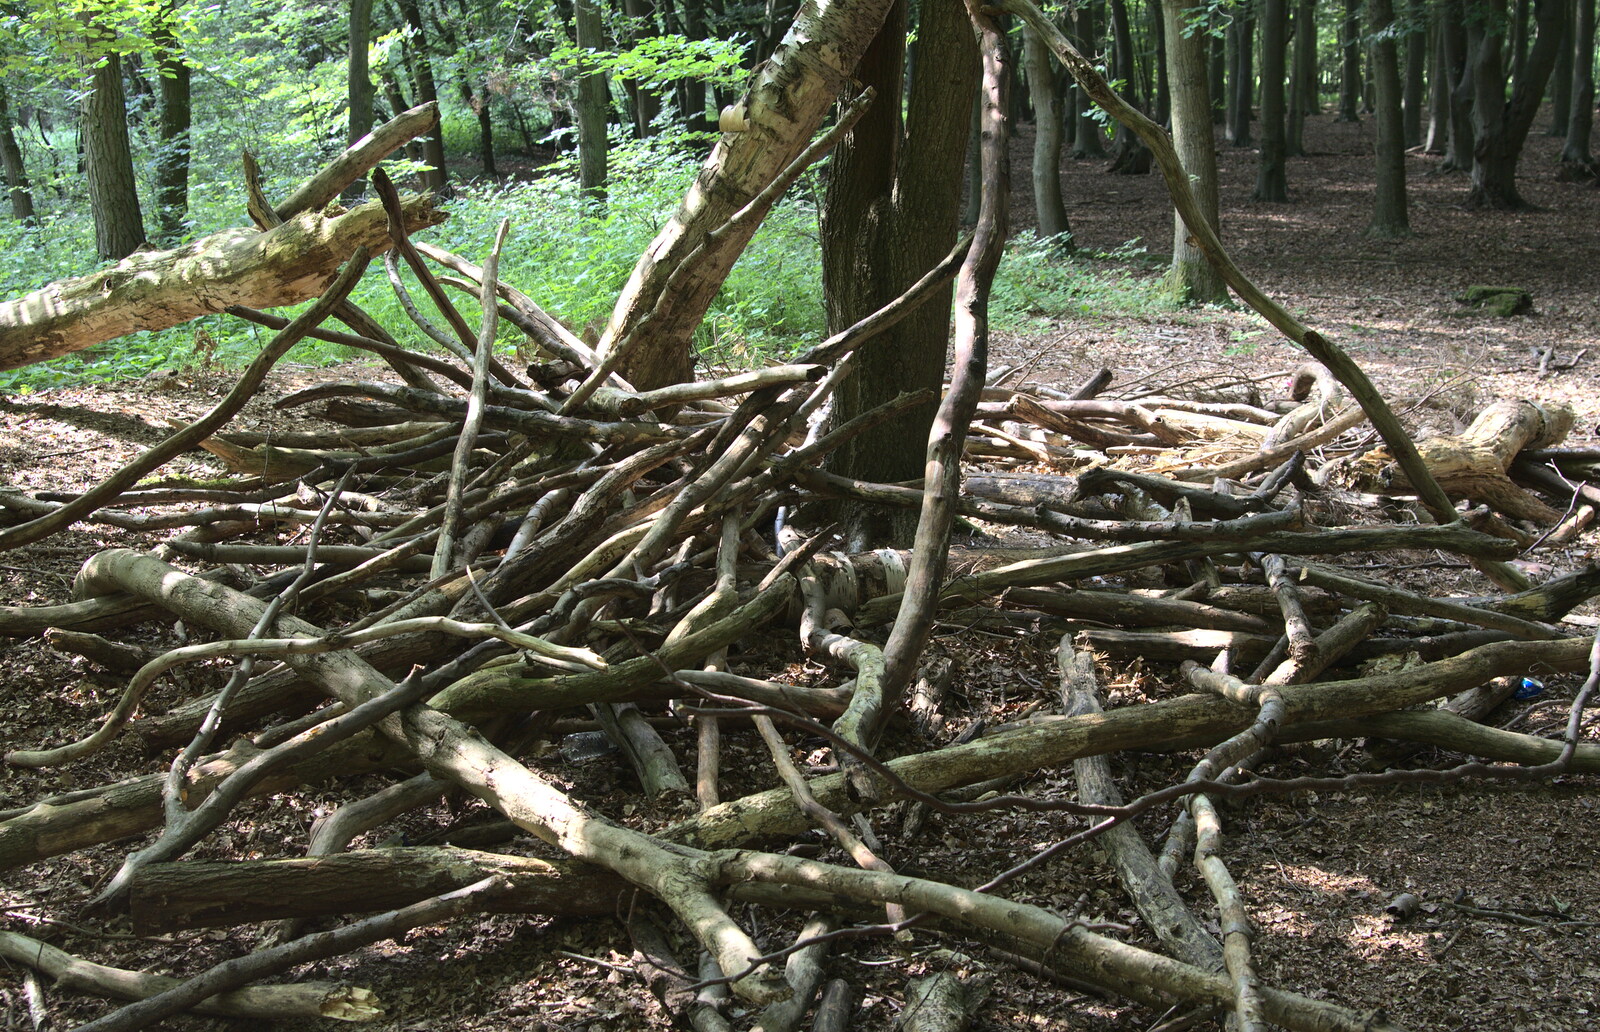 A pile of branches from A Weekend in the Camper Van, West Harling, Norfolk - 21st June 2014